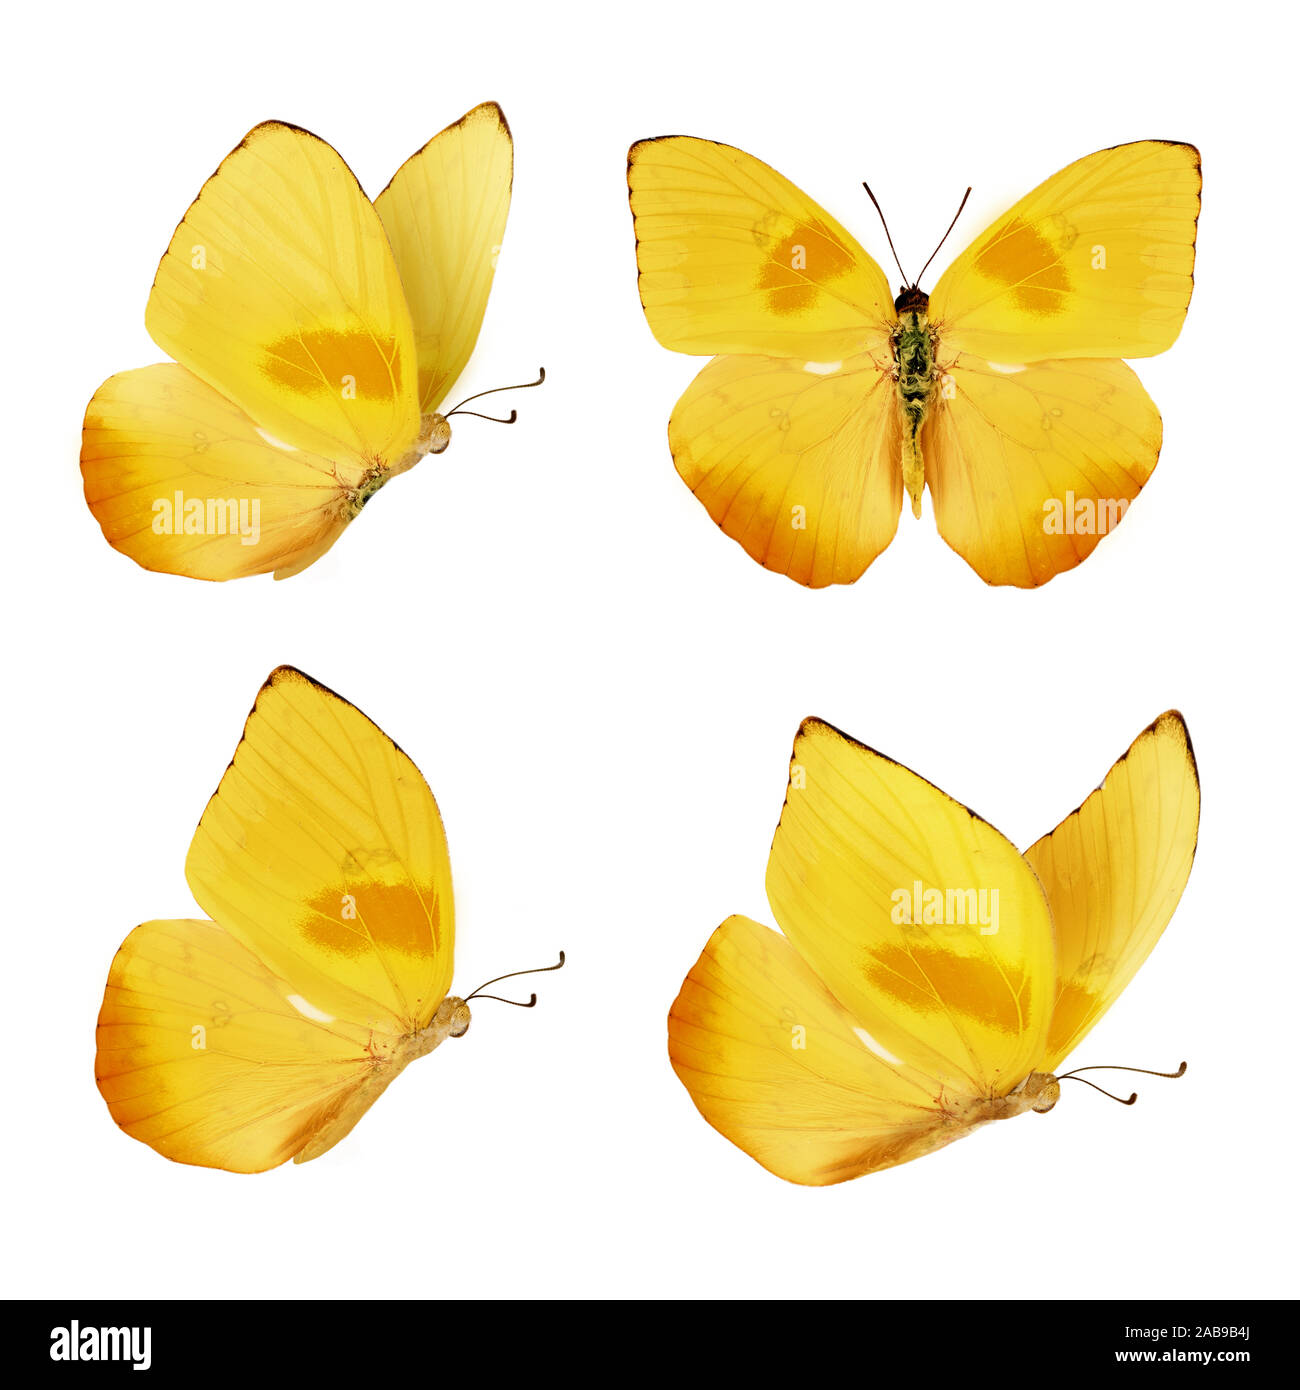 Set of four beautiful yellow butterflies. Phoebis philea butterfly isolated on white background. Butterfly with spread wings and in flight. Stock Photo